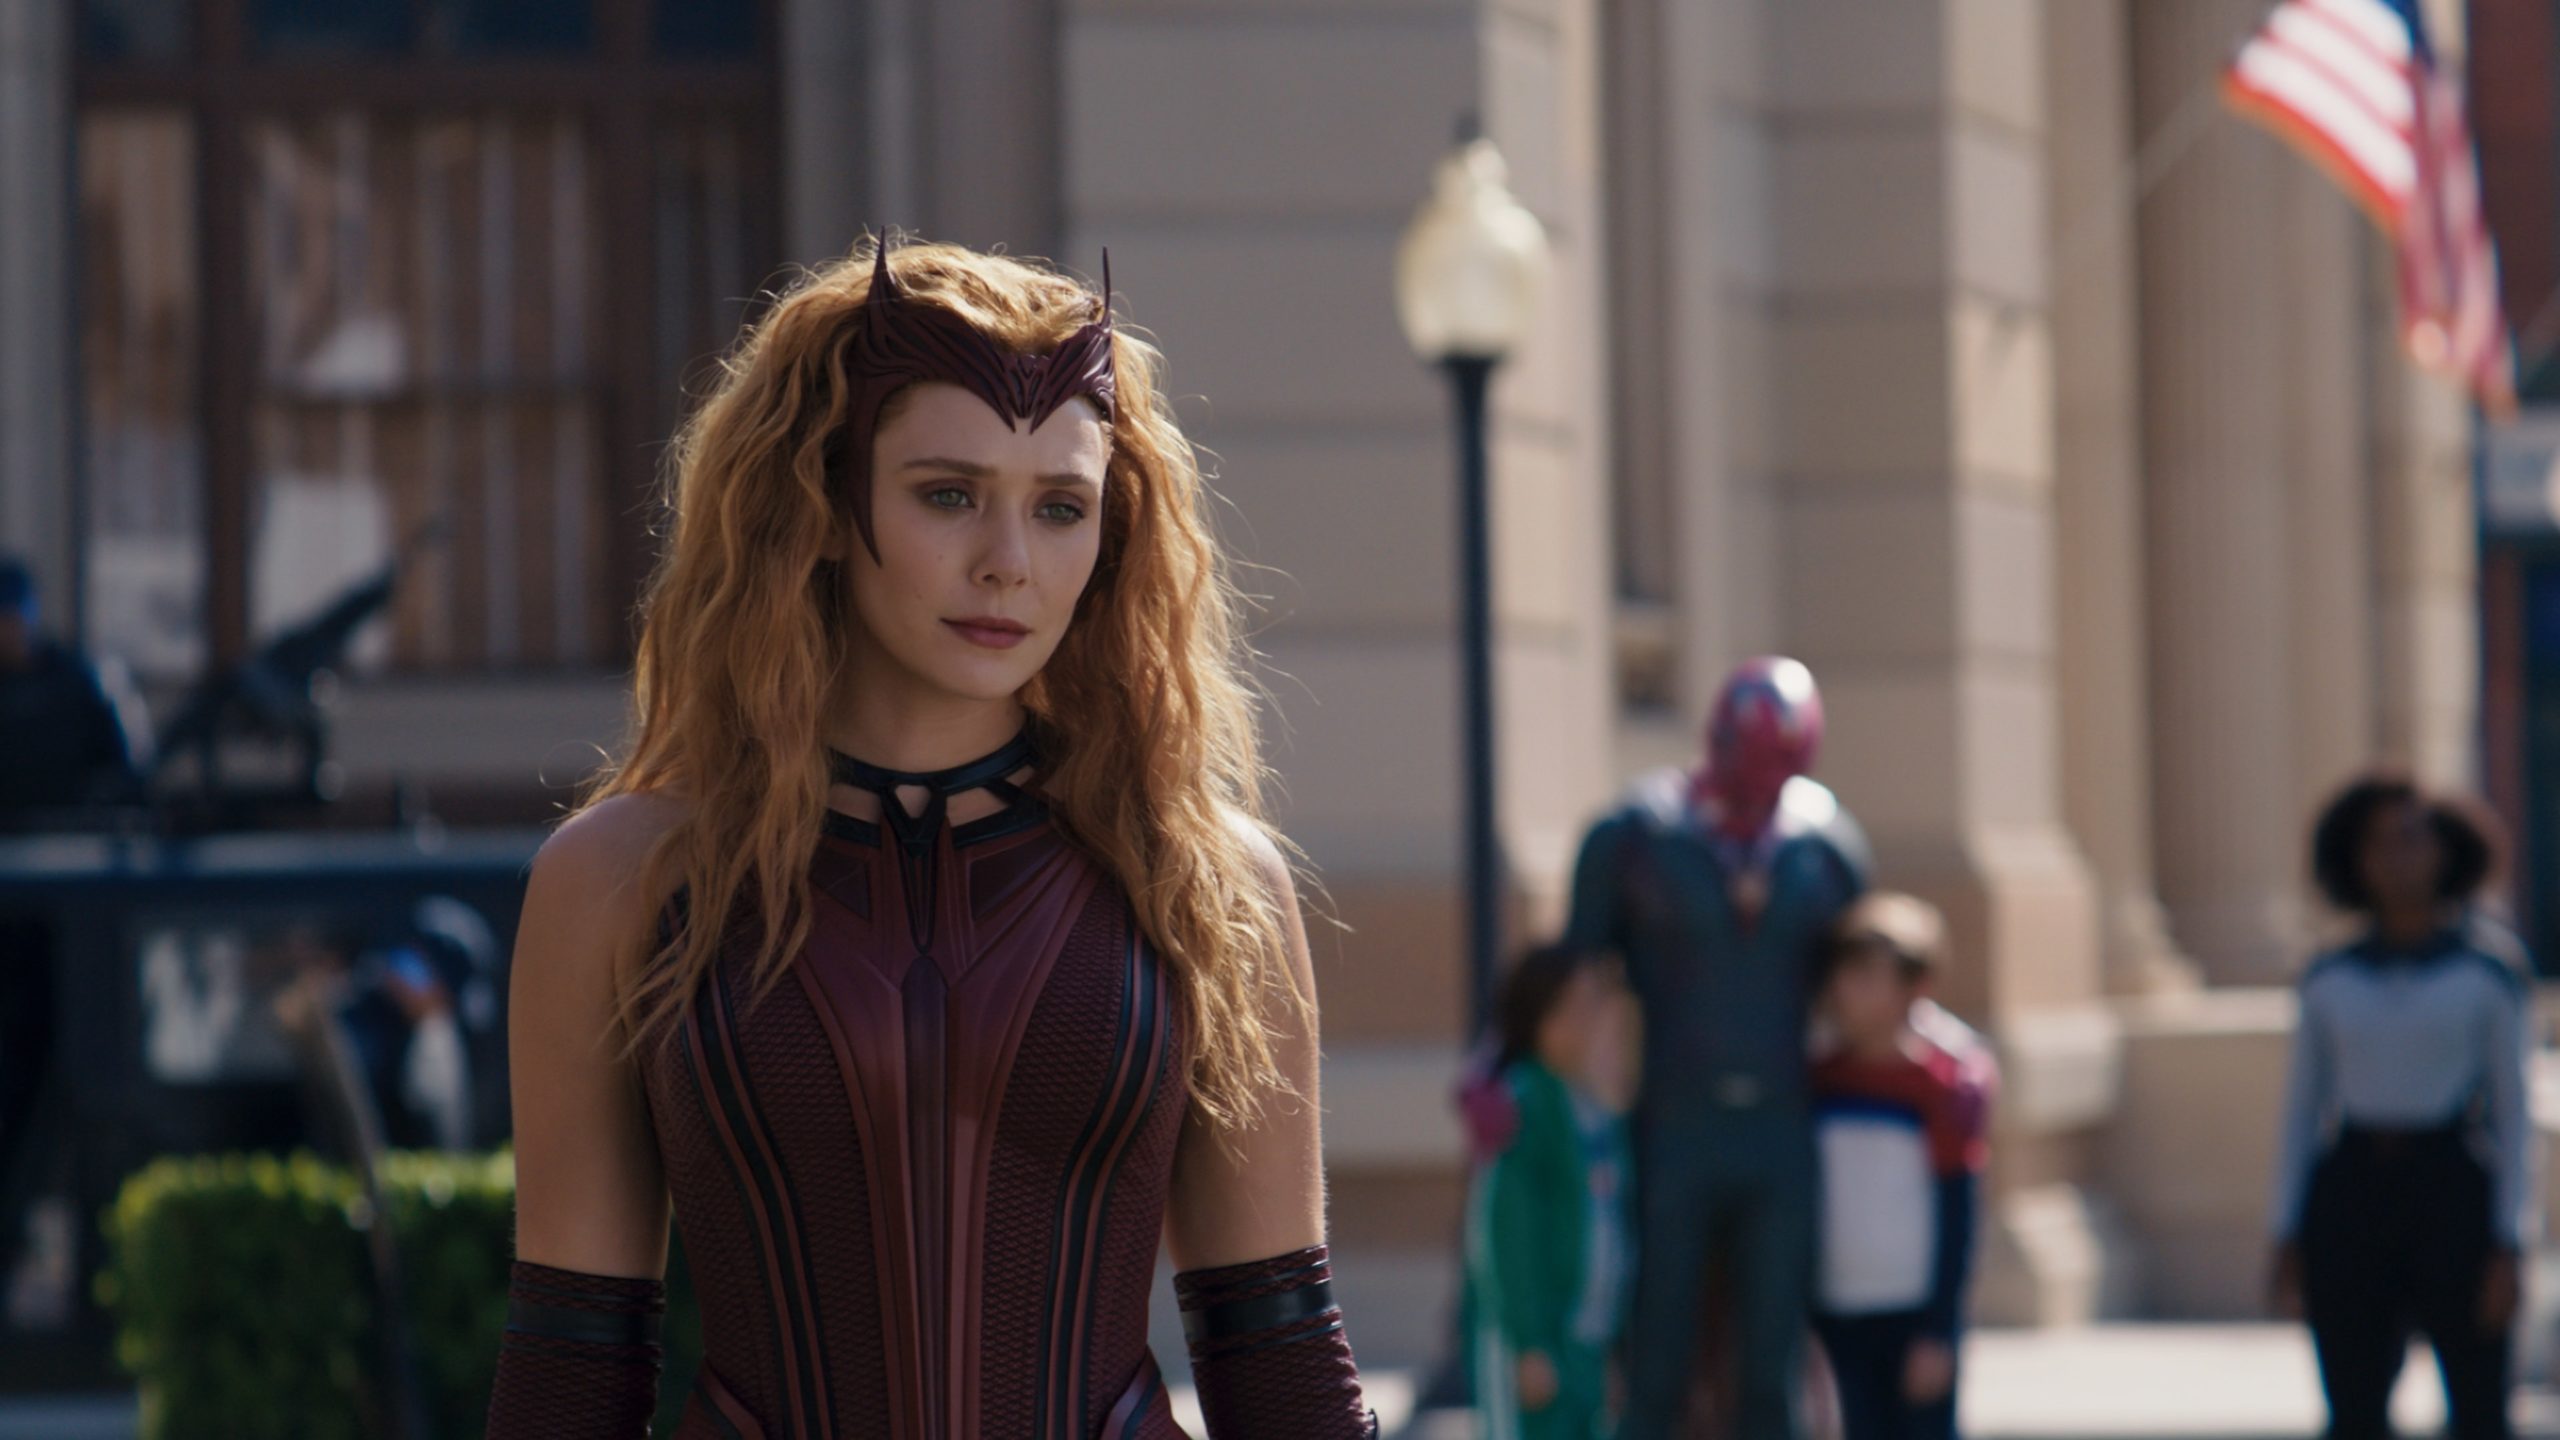 Insider says Marvel is working on Scarlet Witch projects